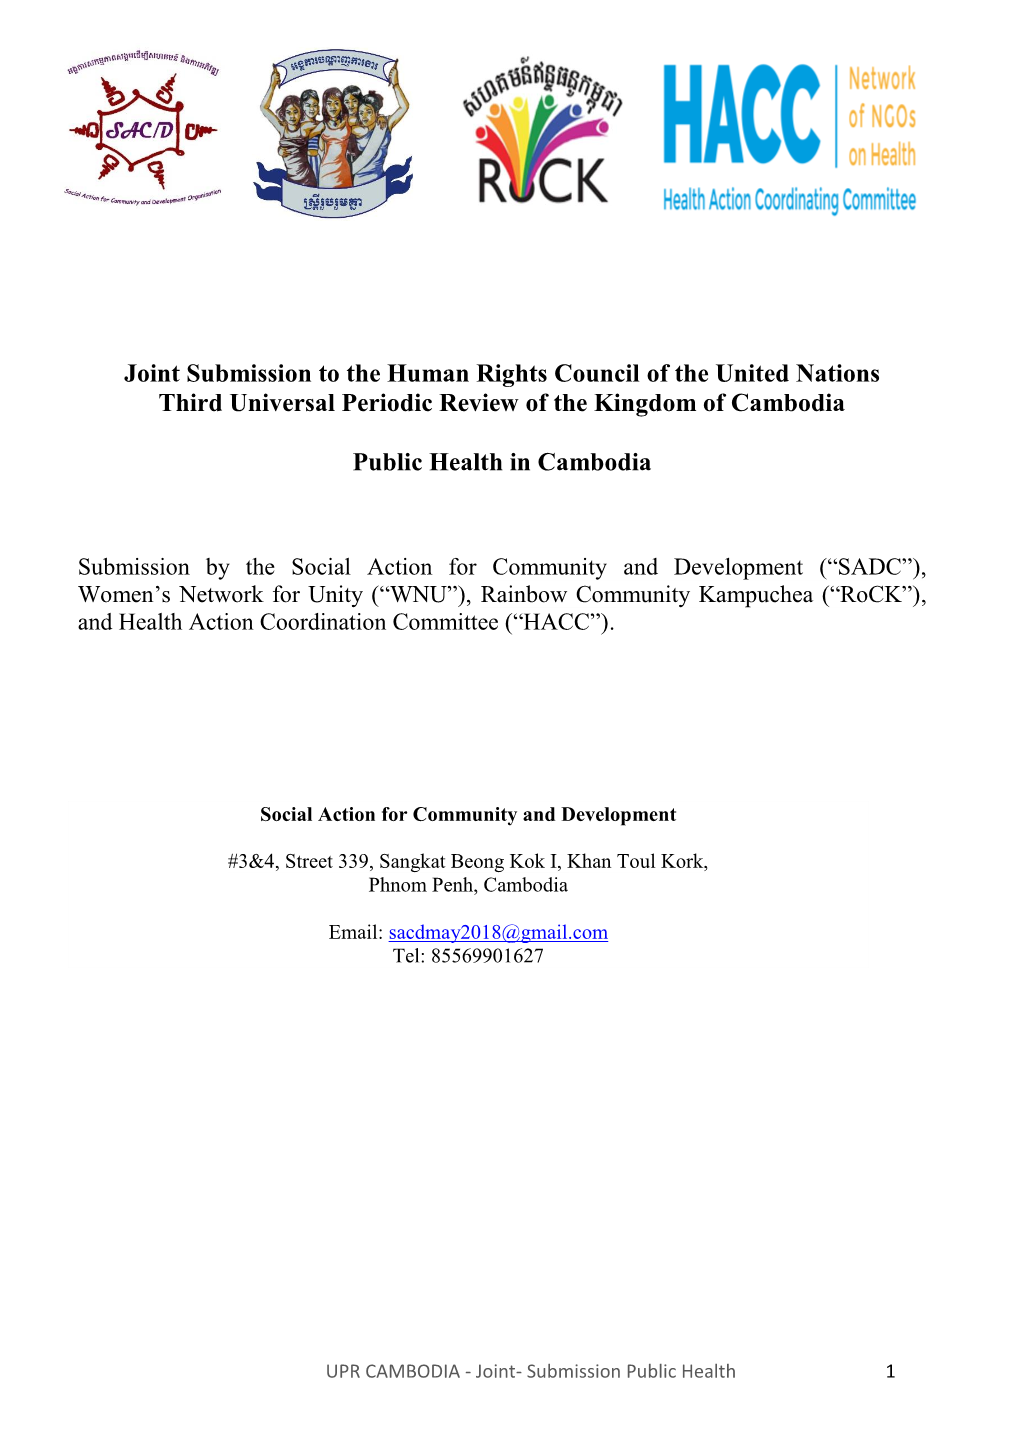 Joint Submission to the Human Rights Council of the United Nations Third Universal Periodic Review of the Kingdom of Cambodia